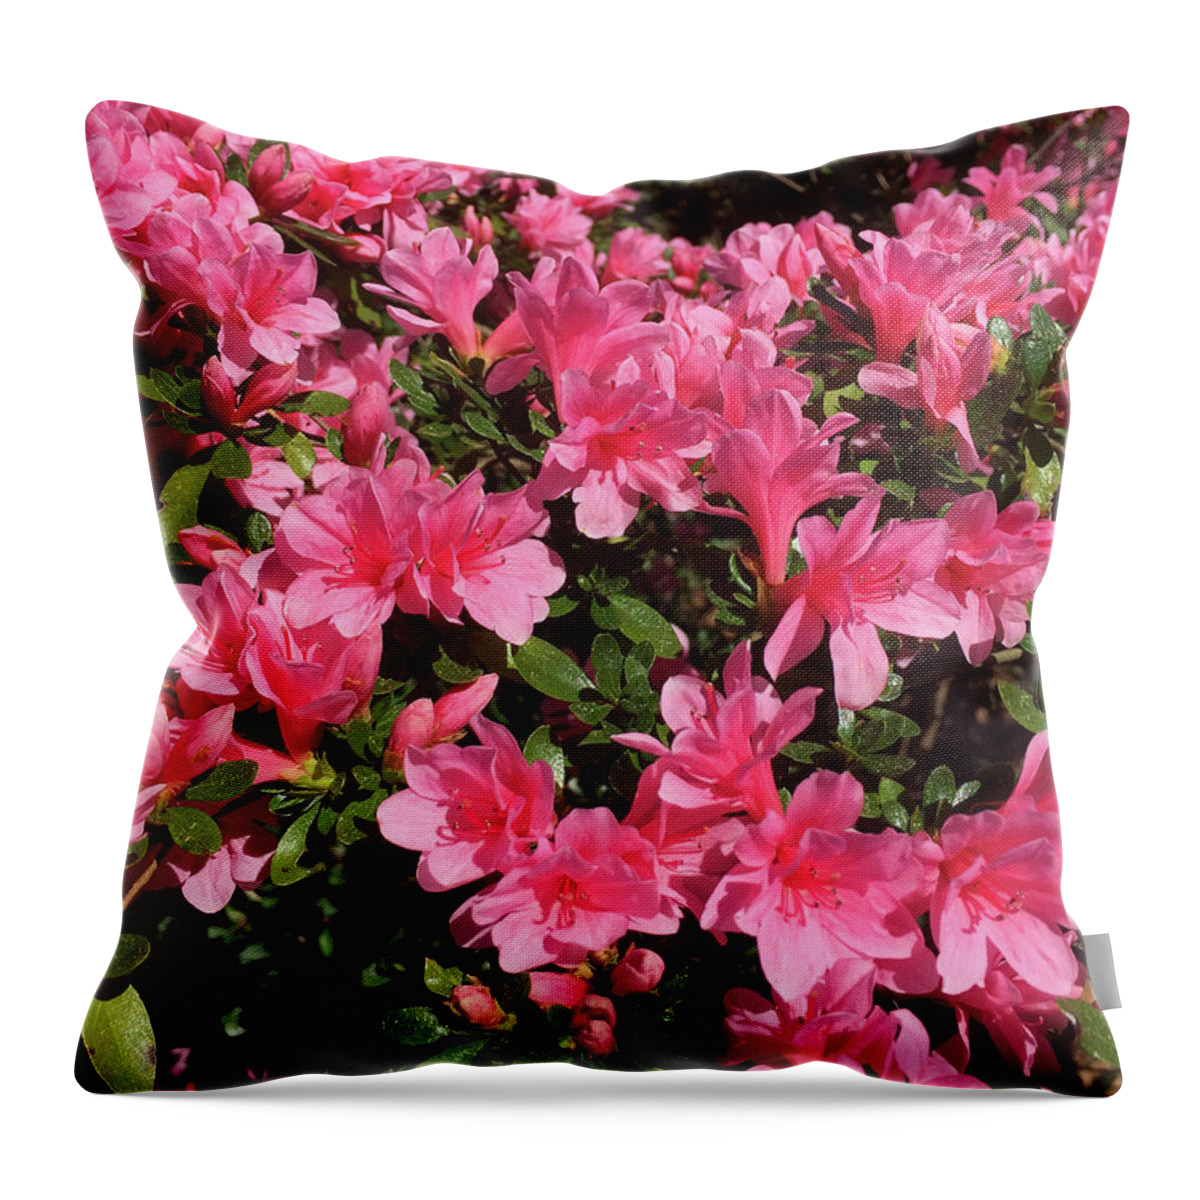 Springtime Throw Pillow featuring the photograph Happy Spring by Matthew Seufer